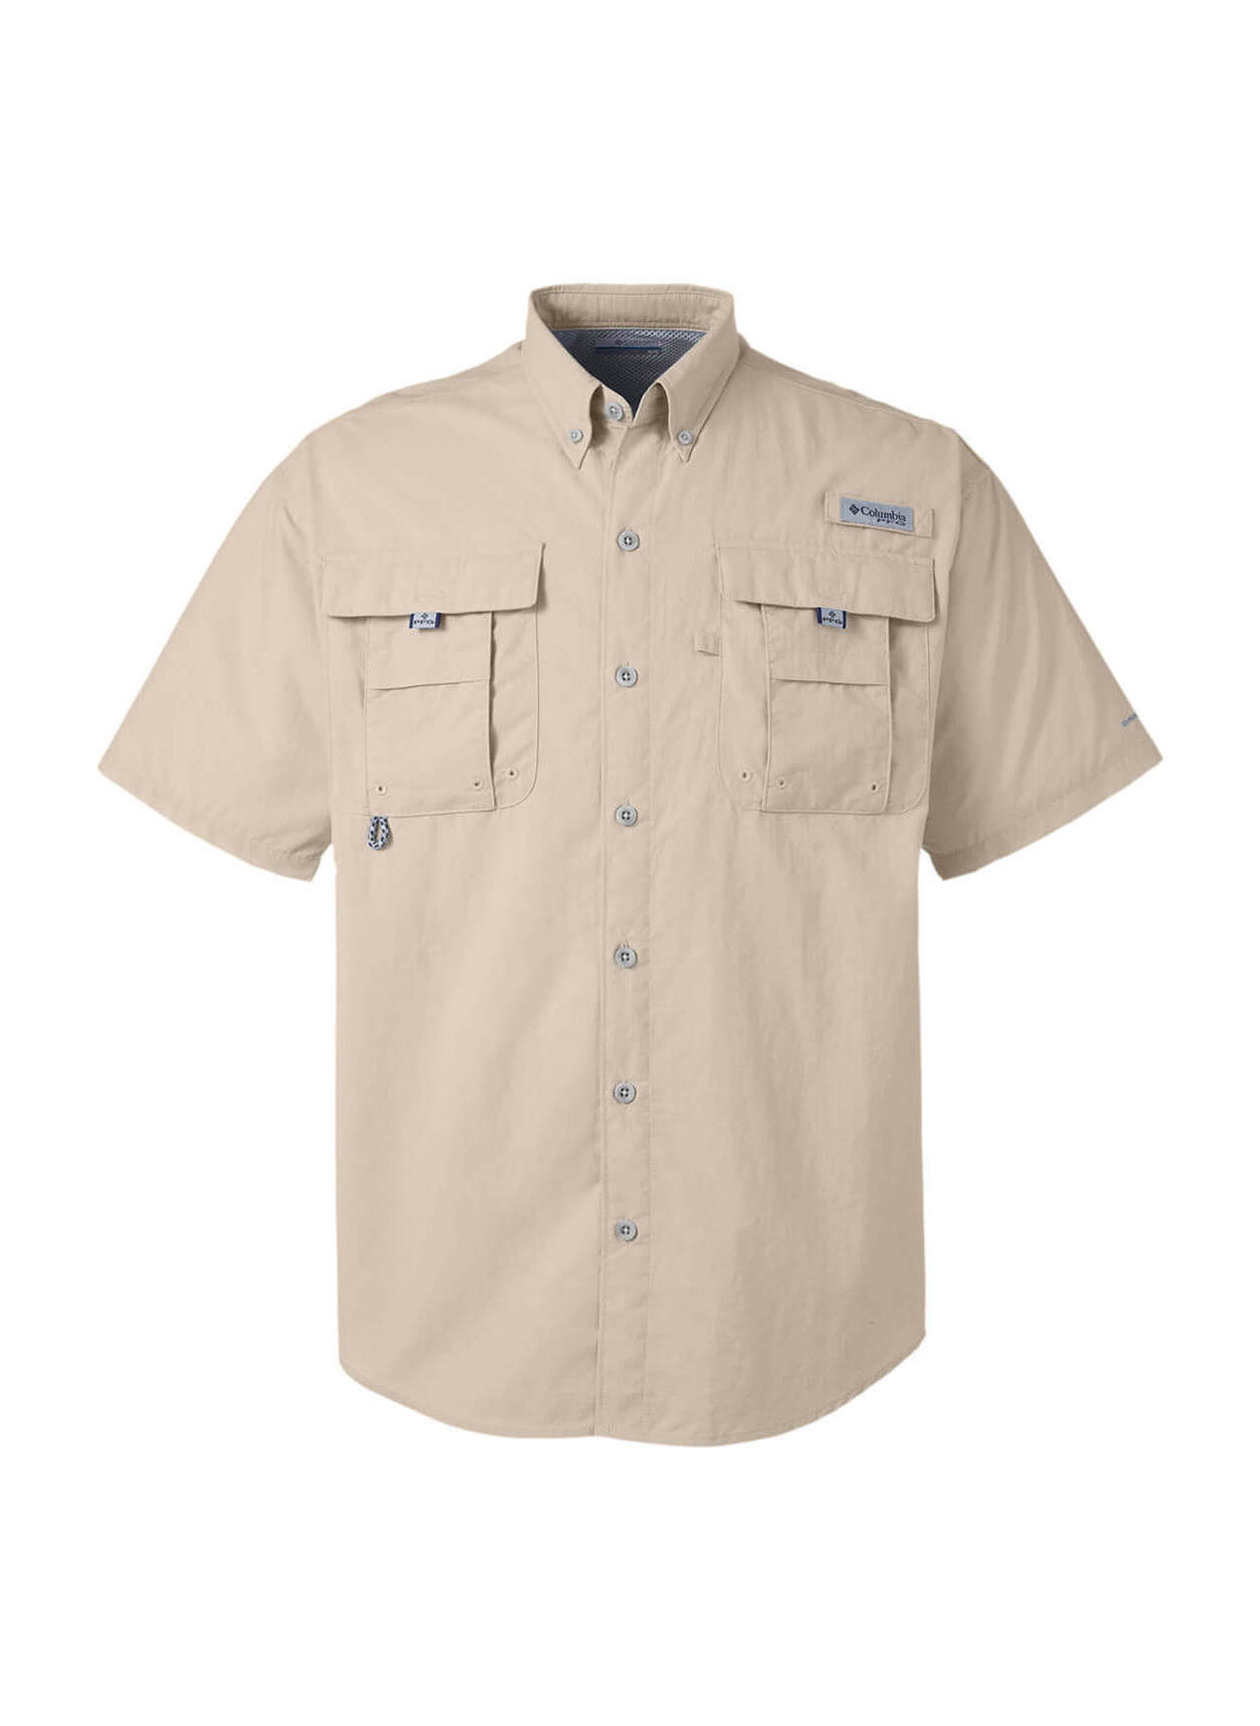 Columbia Shirt Mens Large Blue PFG Button Up Short Sleeve Embroidered Back  Vent